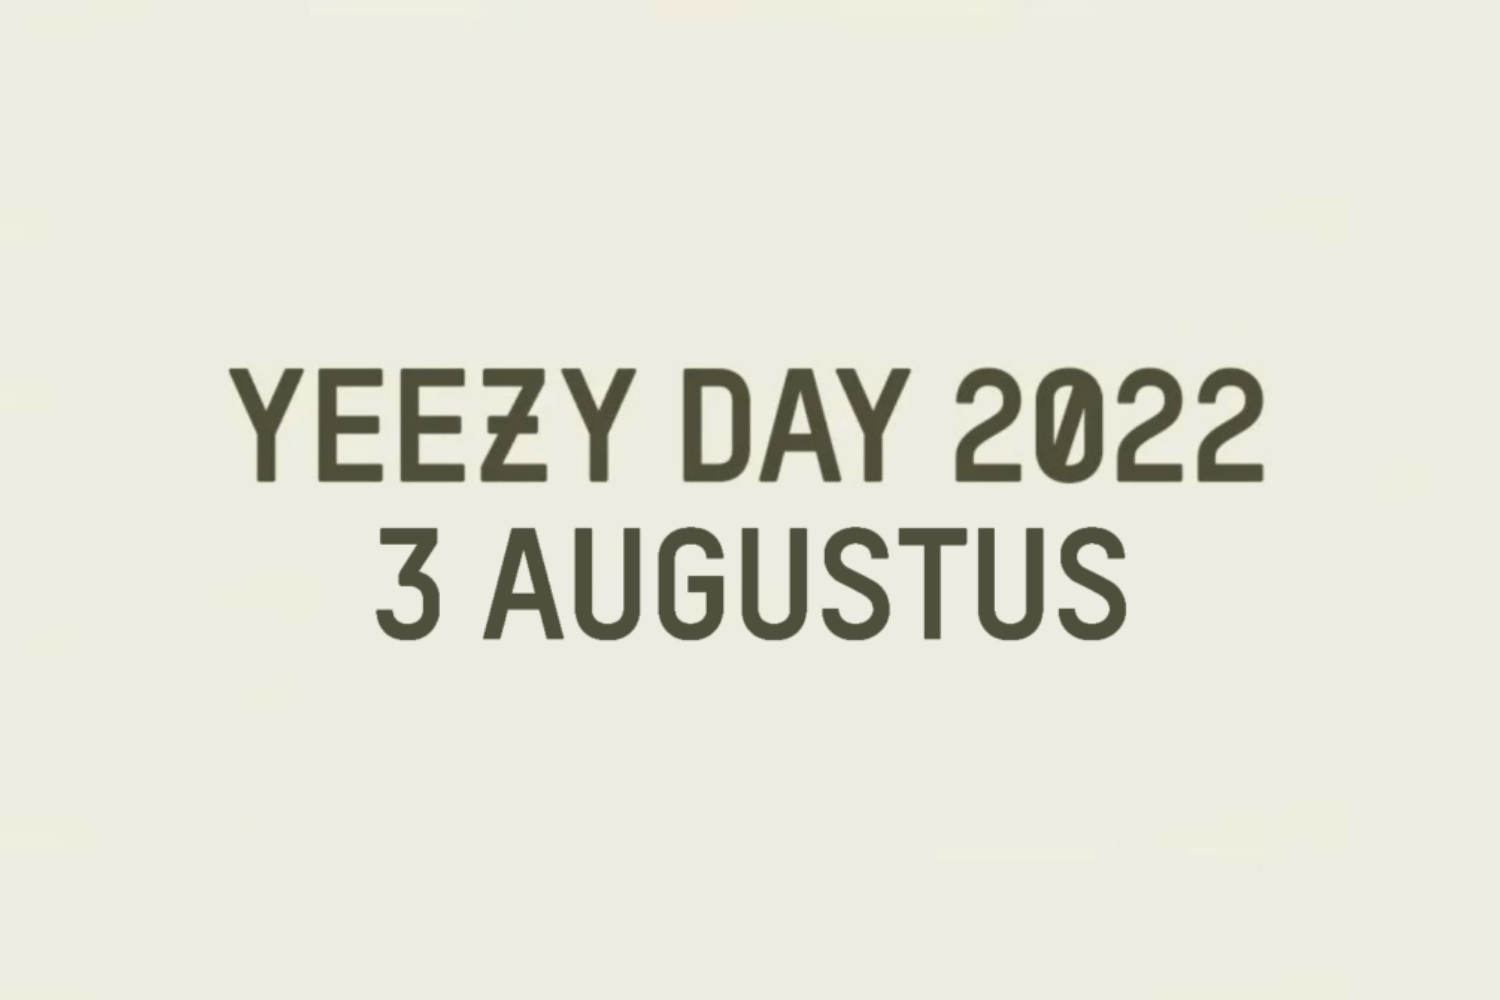 Are you ready for Yeezy Day 2022?